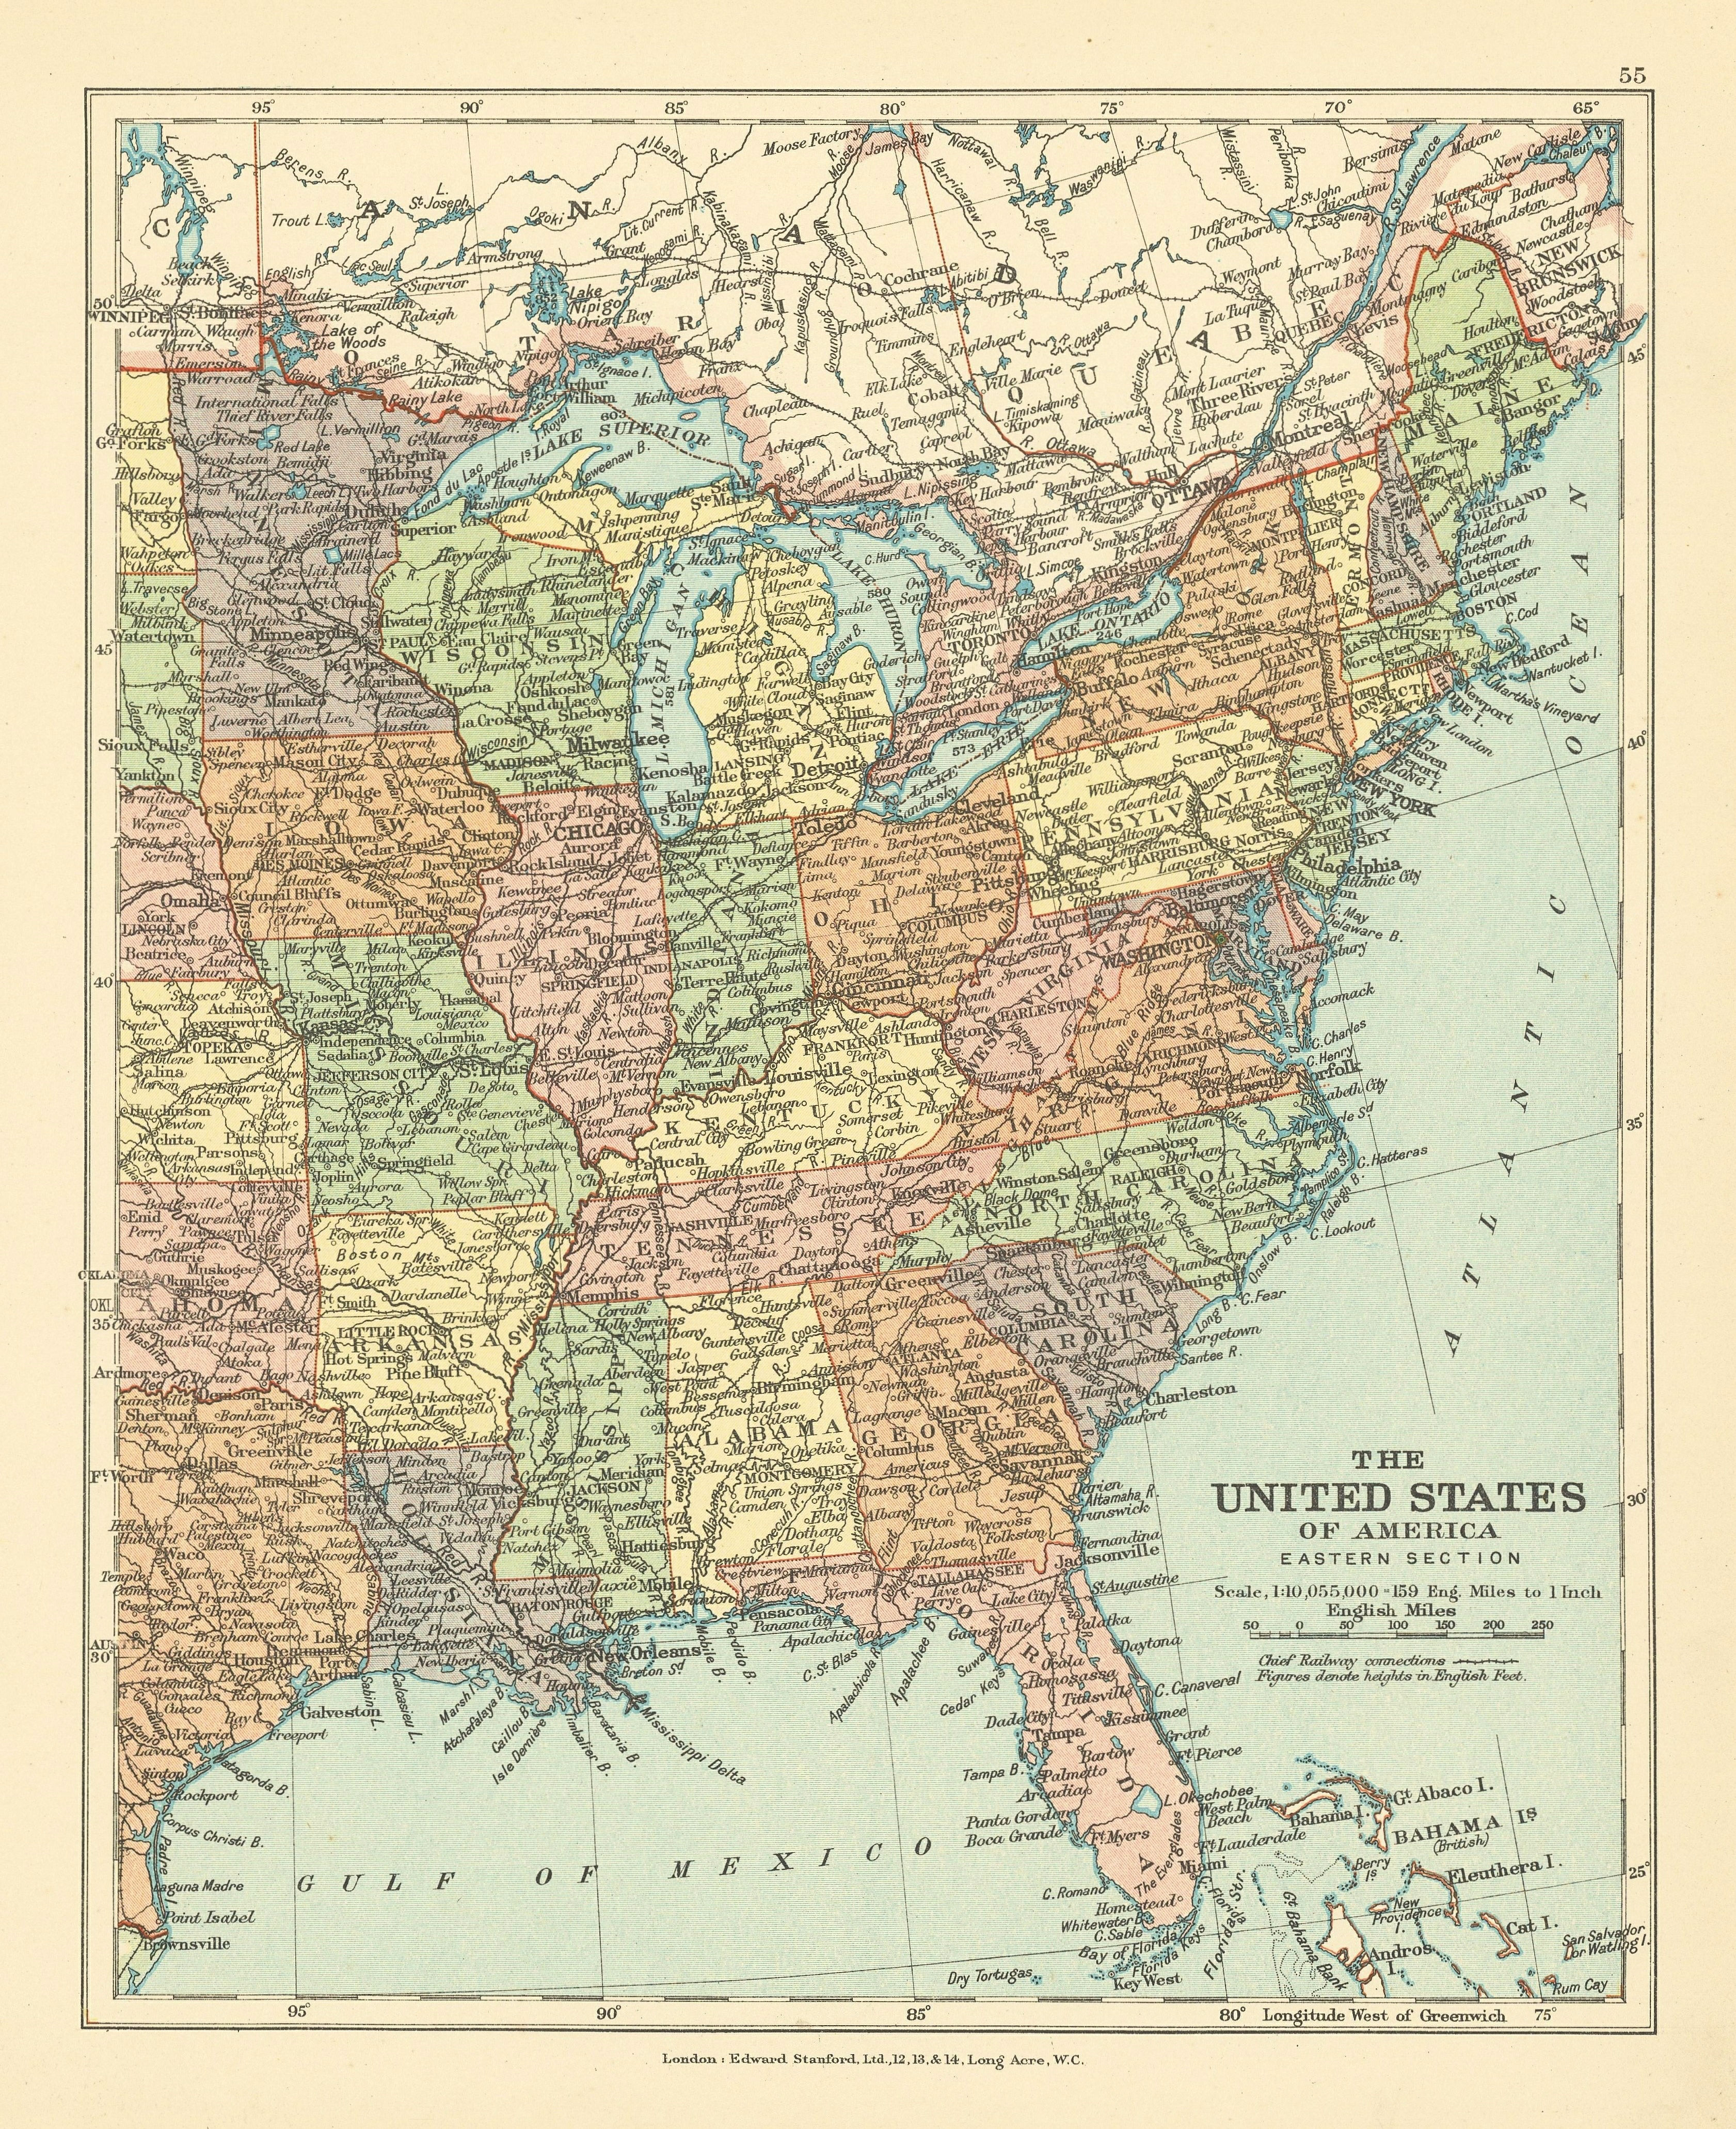 Associate Product United States of America, Eastern Section. USA. STANFORD c1925 old vintage map